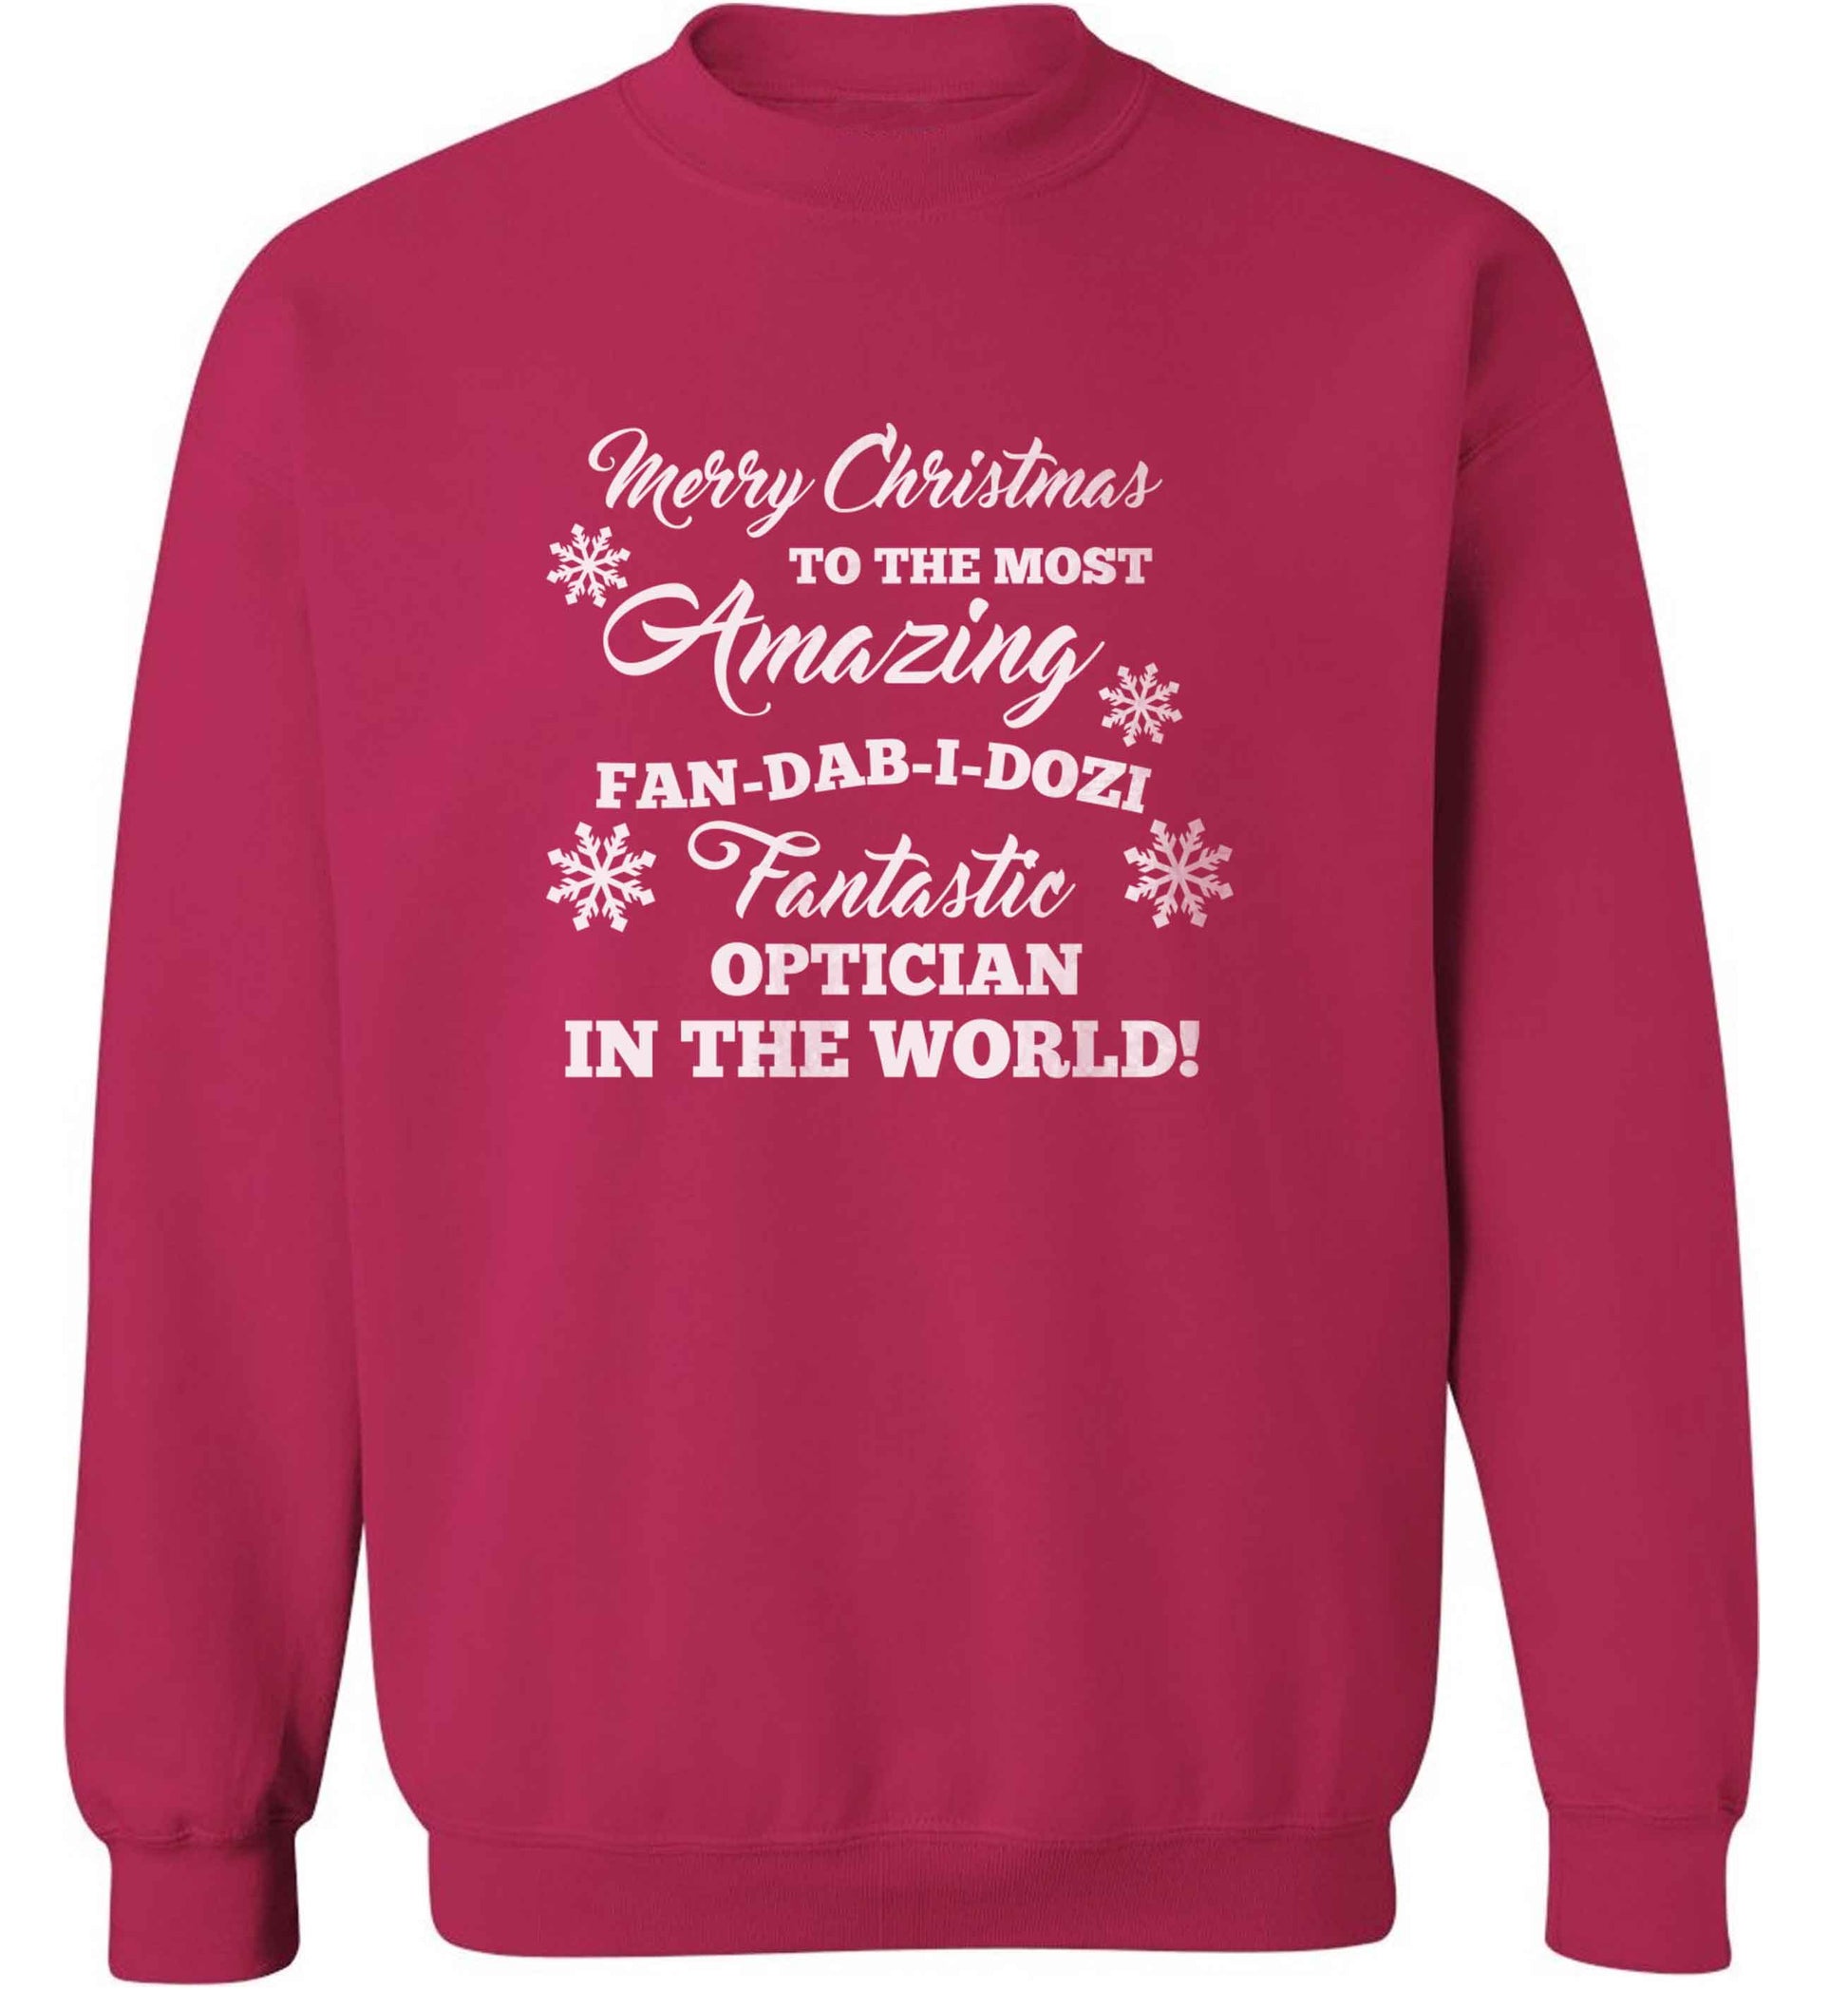 Merry Christmas to the most amazing optician in the world! adult's unisex pink sweater 2XL